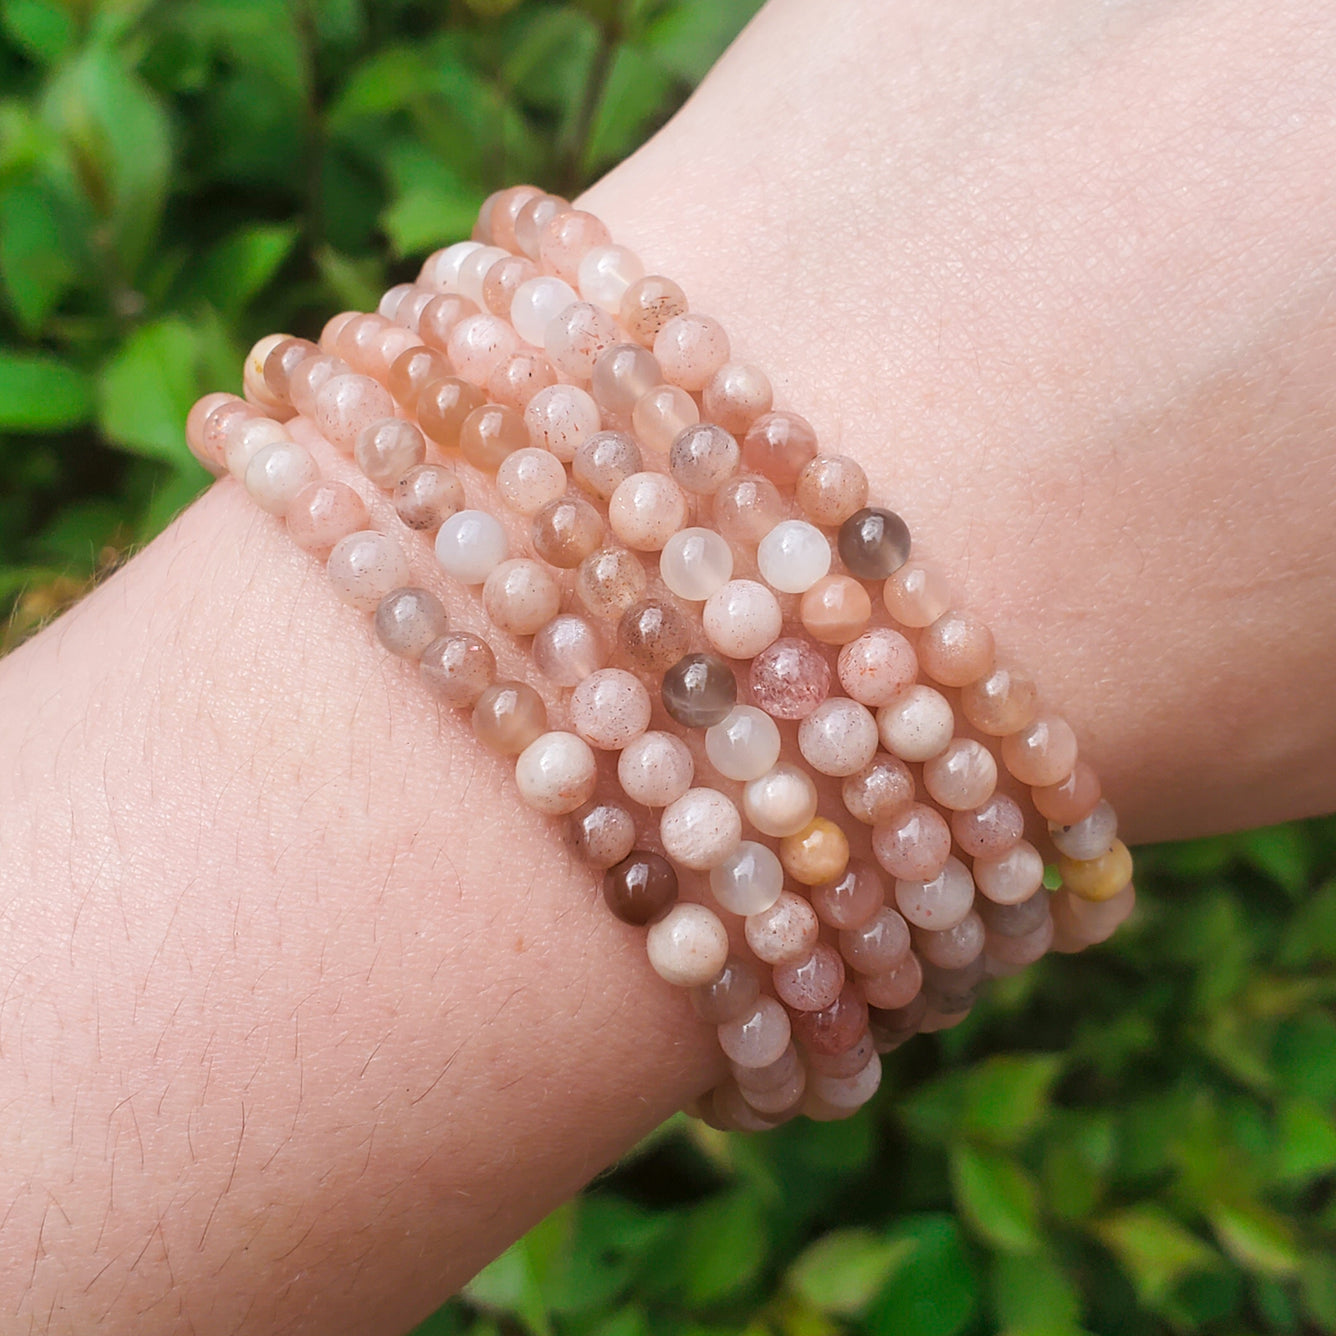 Buy Reiki Crystal Products Sunstone Bracelet 12 mm Stone Bracelet Crystal  Bracelet for Reiki Healing and Crystal Healing (Color : Peach) at Amazon.in